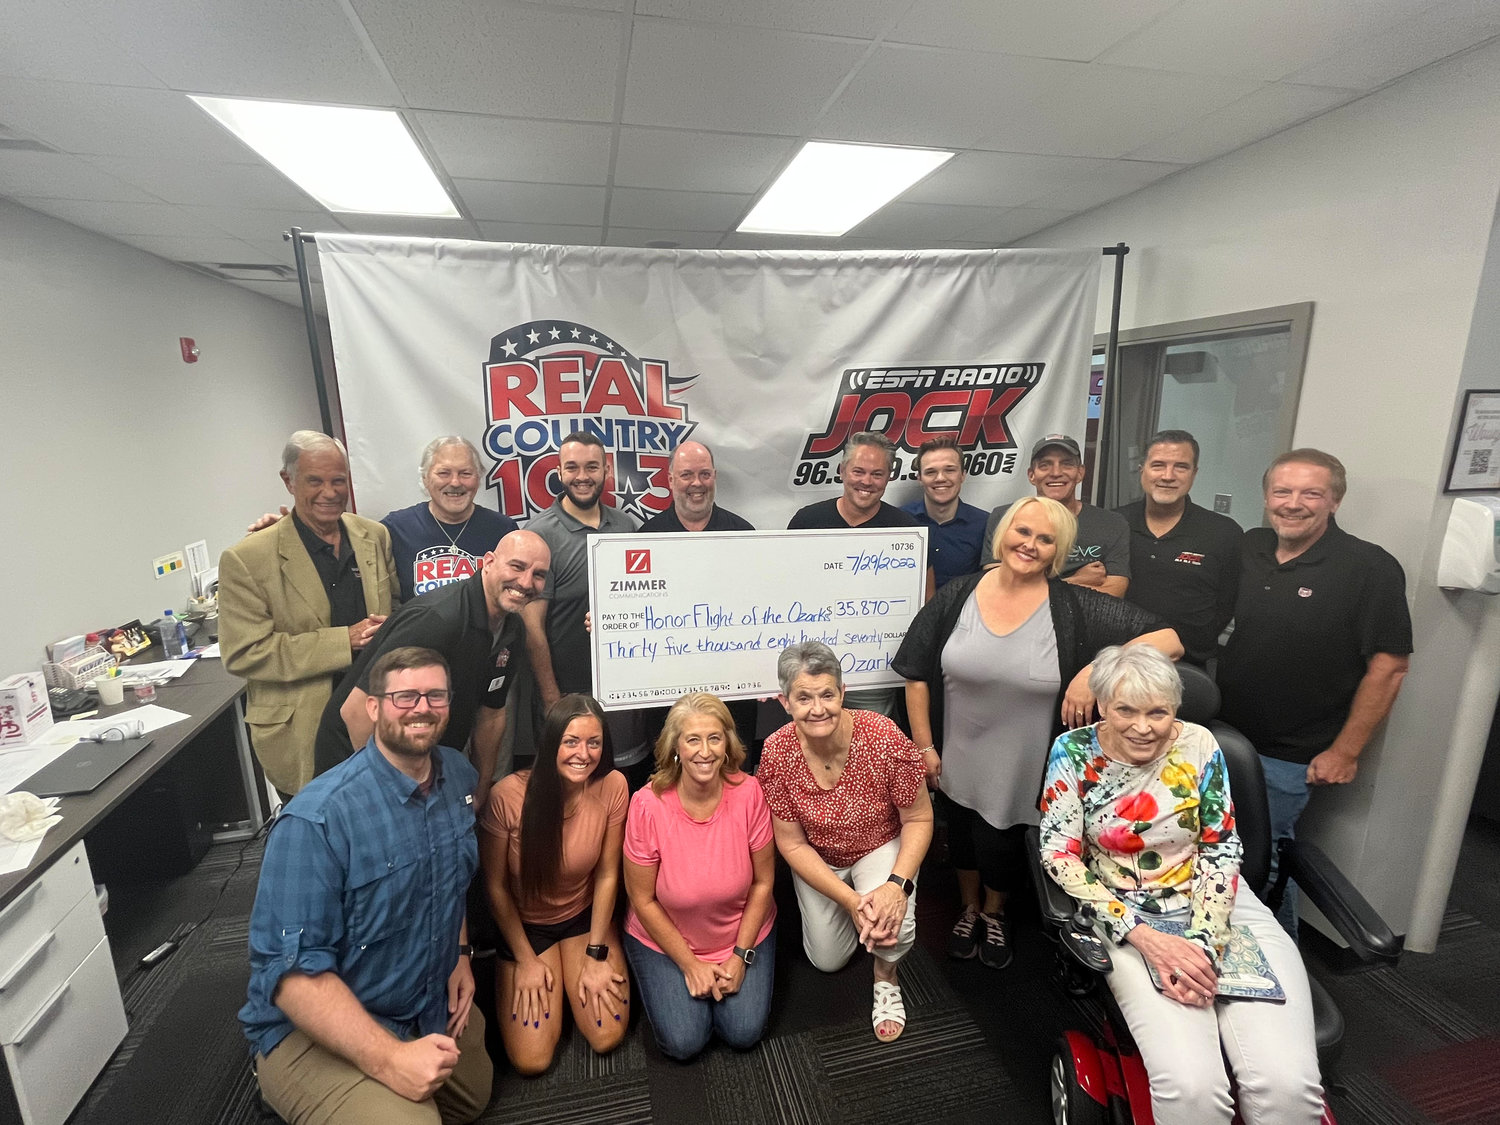 Zimmer staff in Springfield hosted a radiothon that raised $35,870 for Honor Flight of the Ozarks.